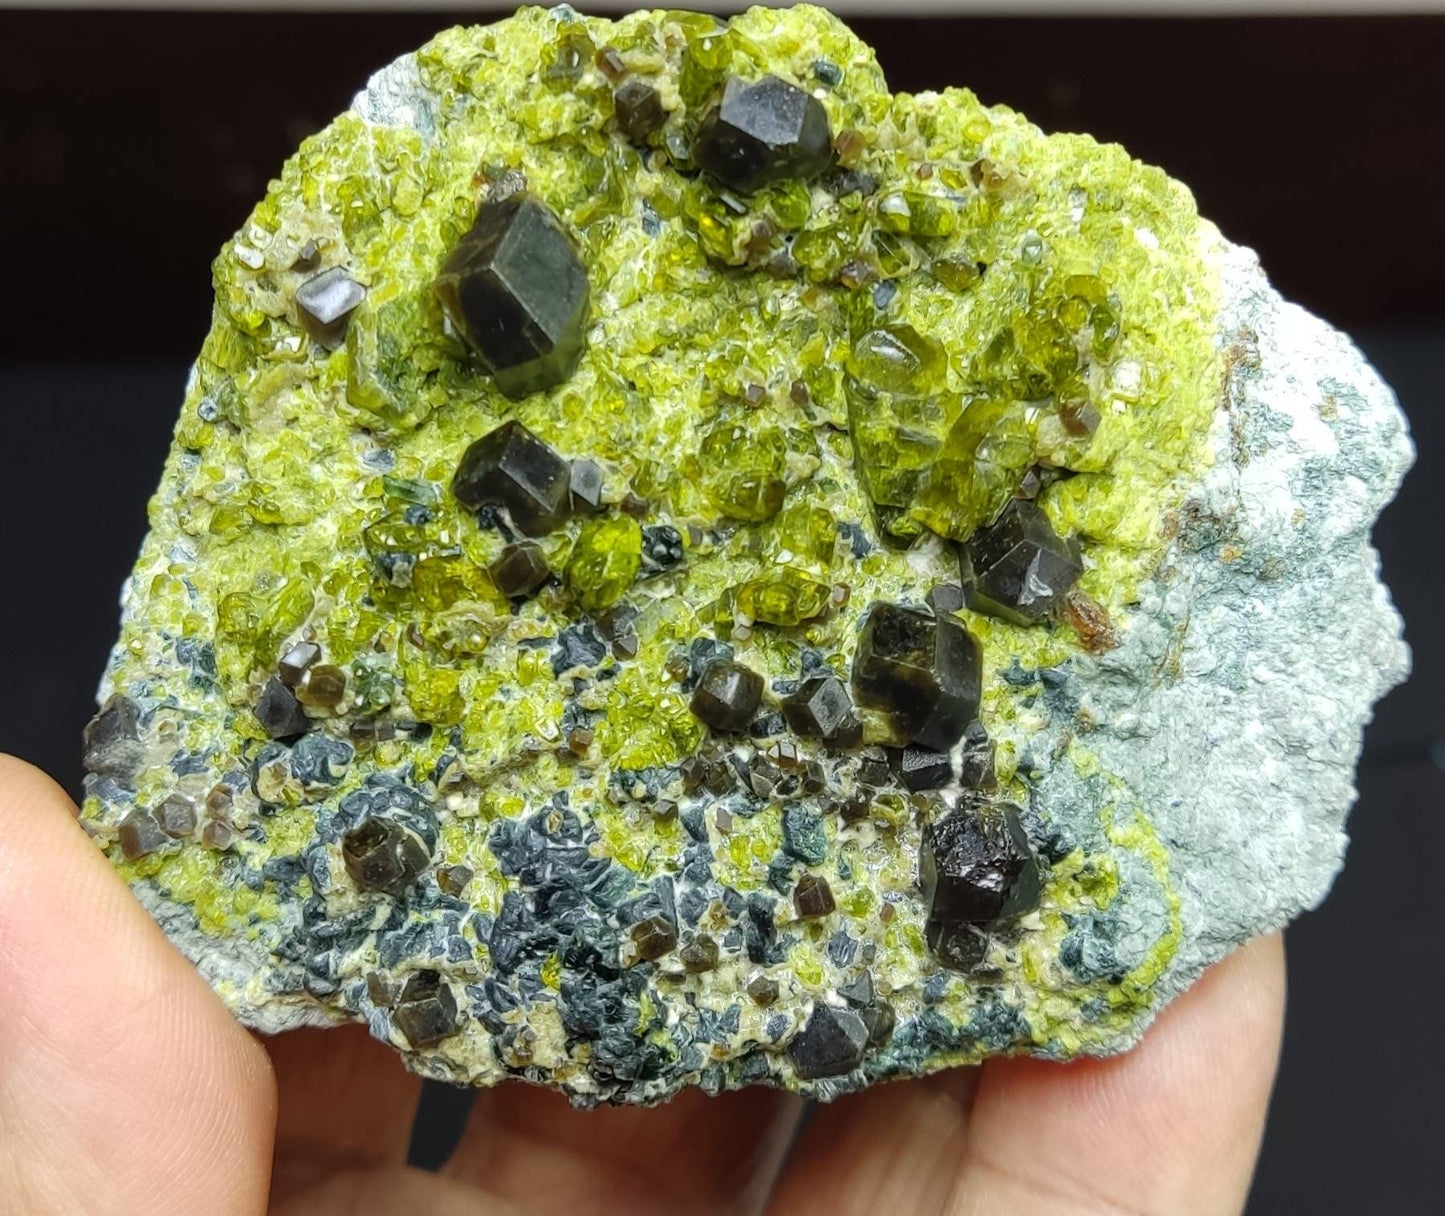 Andradite garnet crystals on matrix with epidote an aesthetic specimen 302 grams